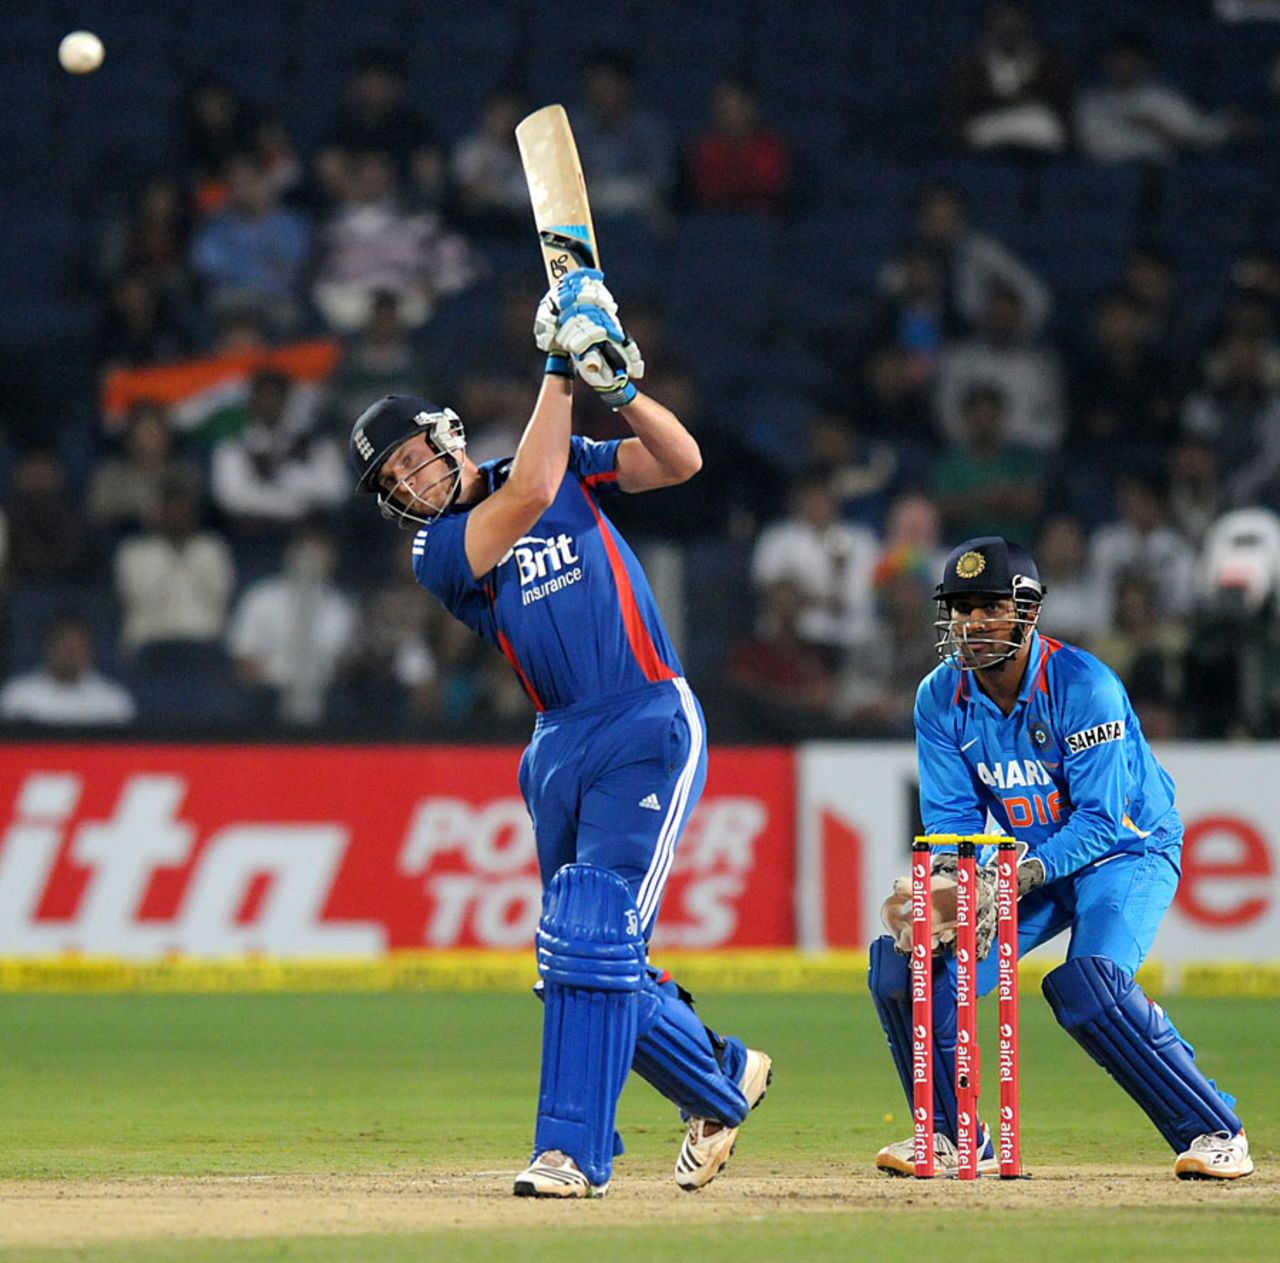 Jos Buttler gave the innings a late kick, India v England, 1st T20, Pune, December 20, 2012